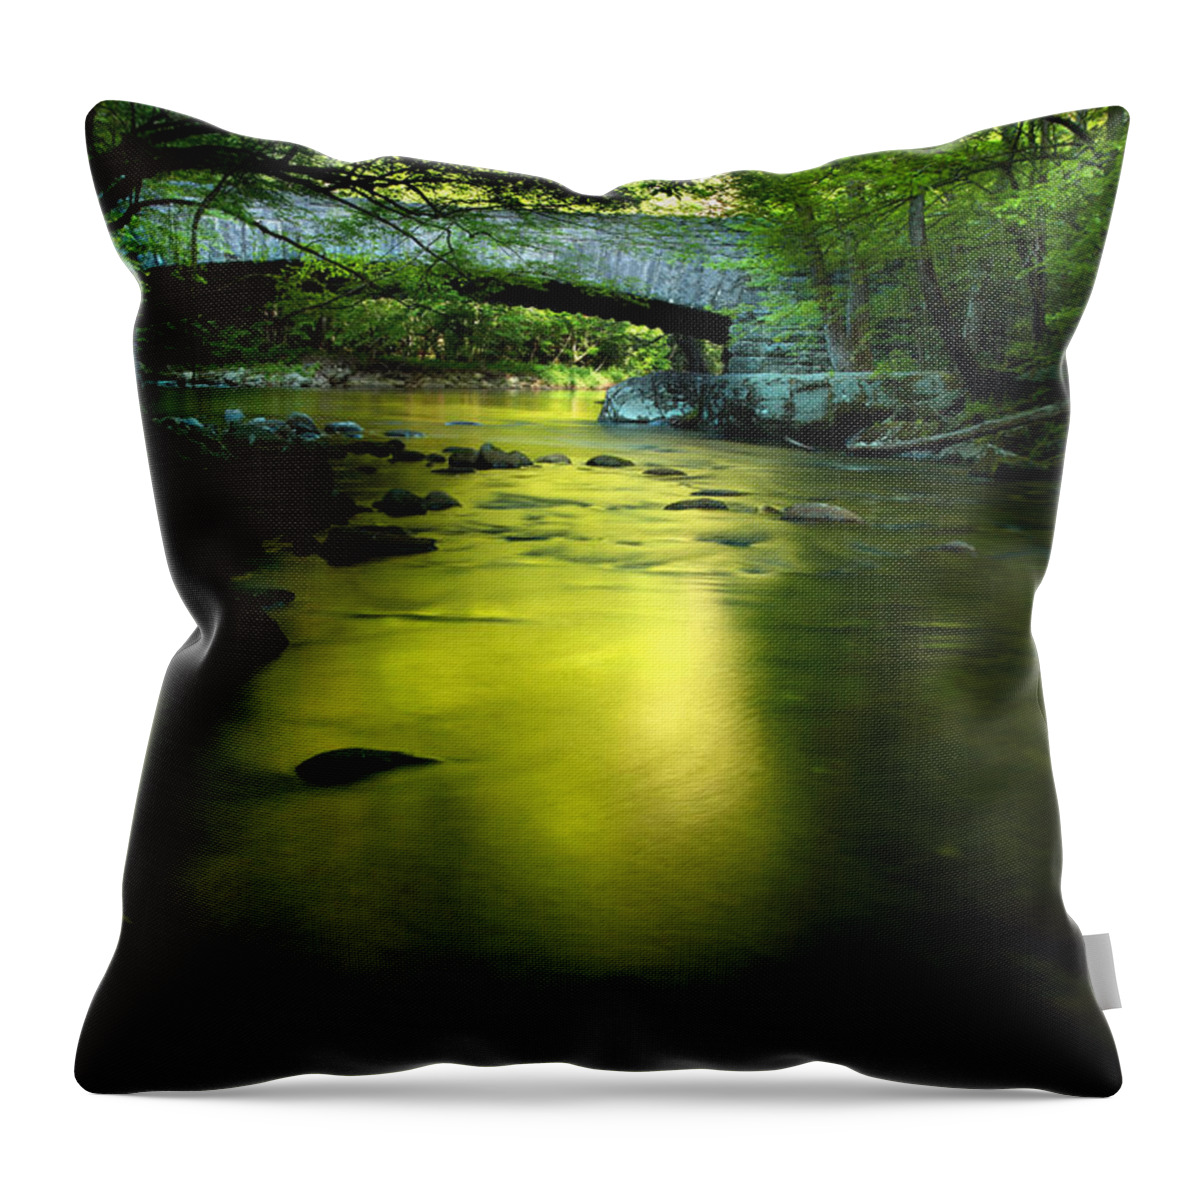 River Bridge Throw Pillow featuring the photograph Morning Dreams by Michael Eingle